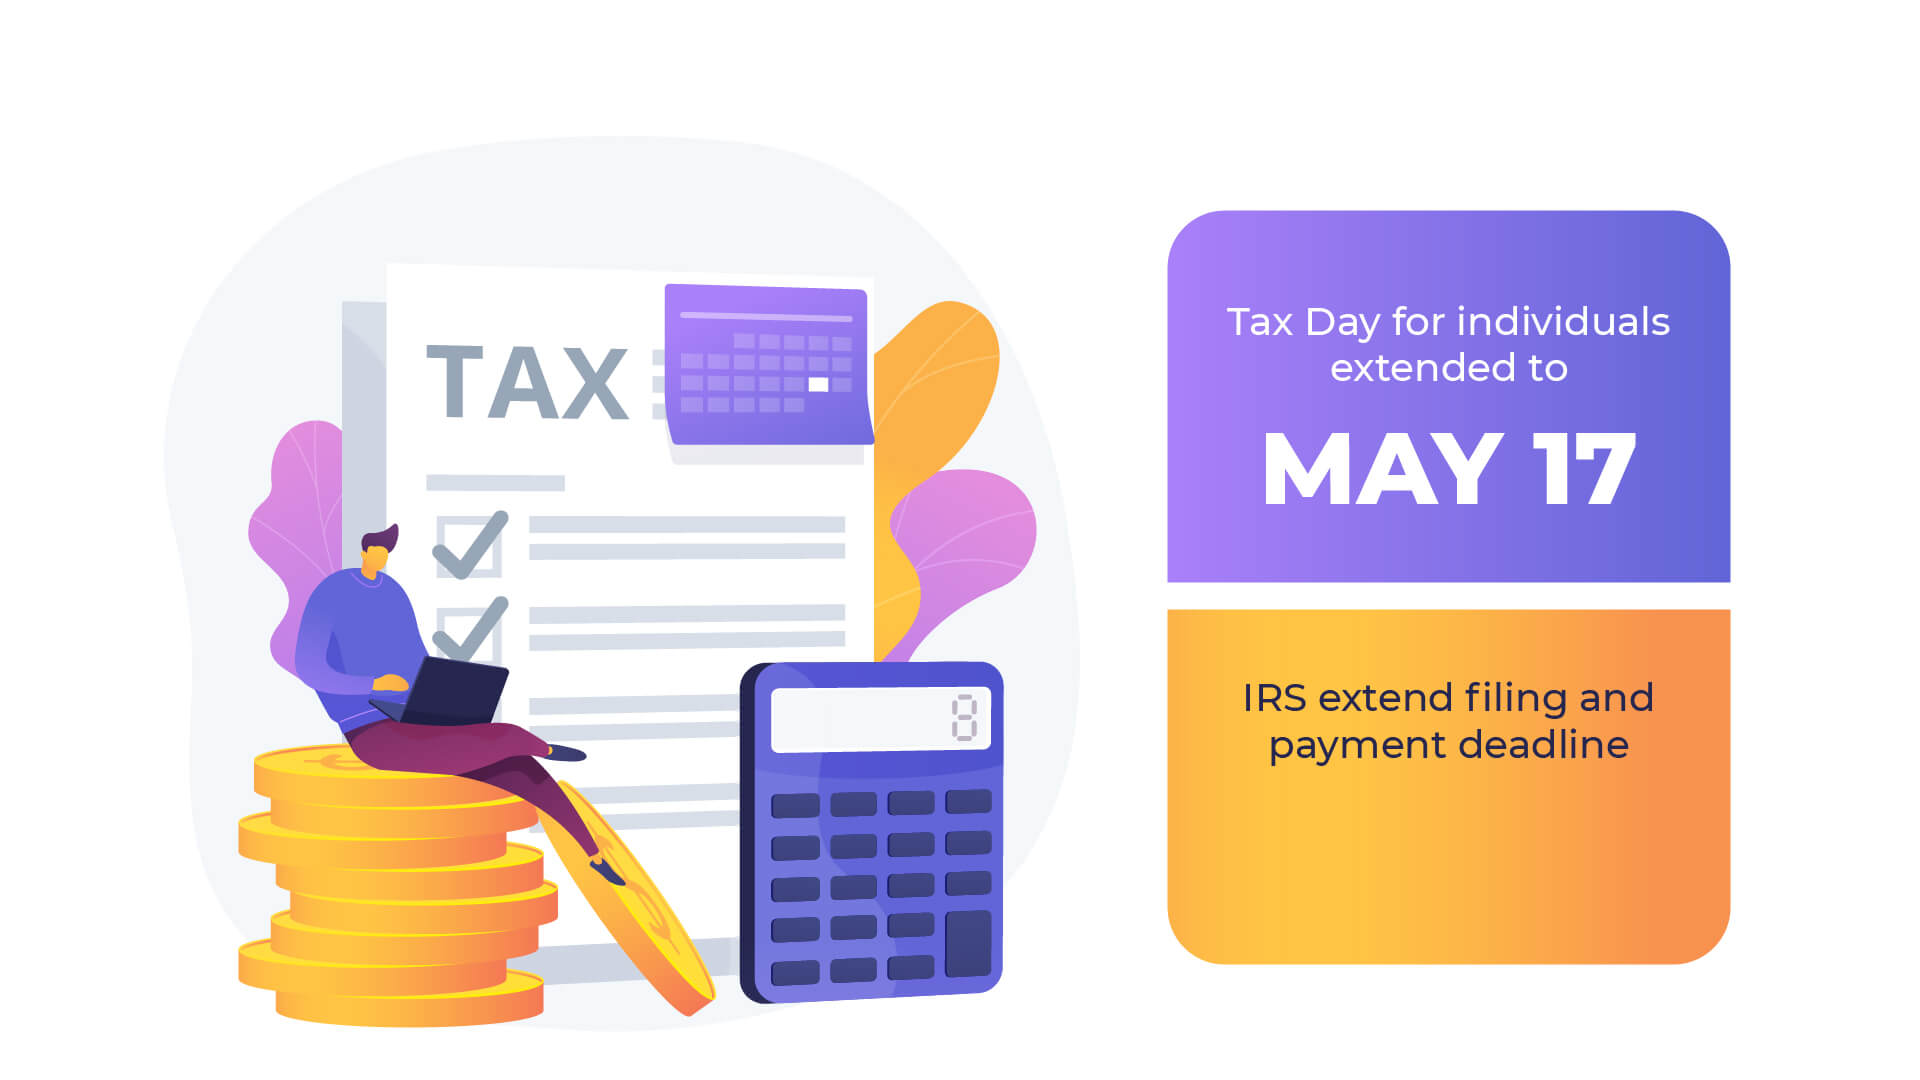 Individual taxpayers can also postpone federal income tax payments for the 2020 tax year due on April 15, 2021, to May 17, 2021, without penalties